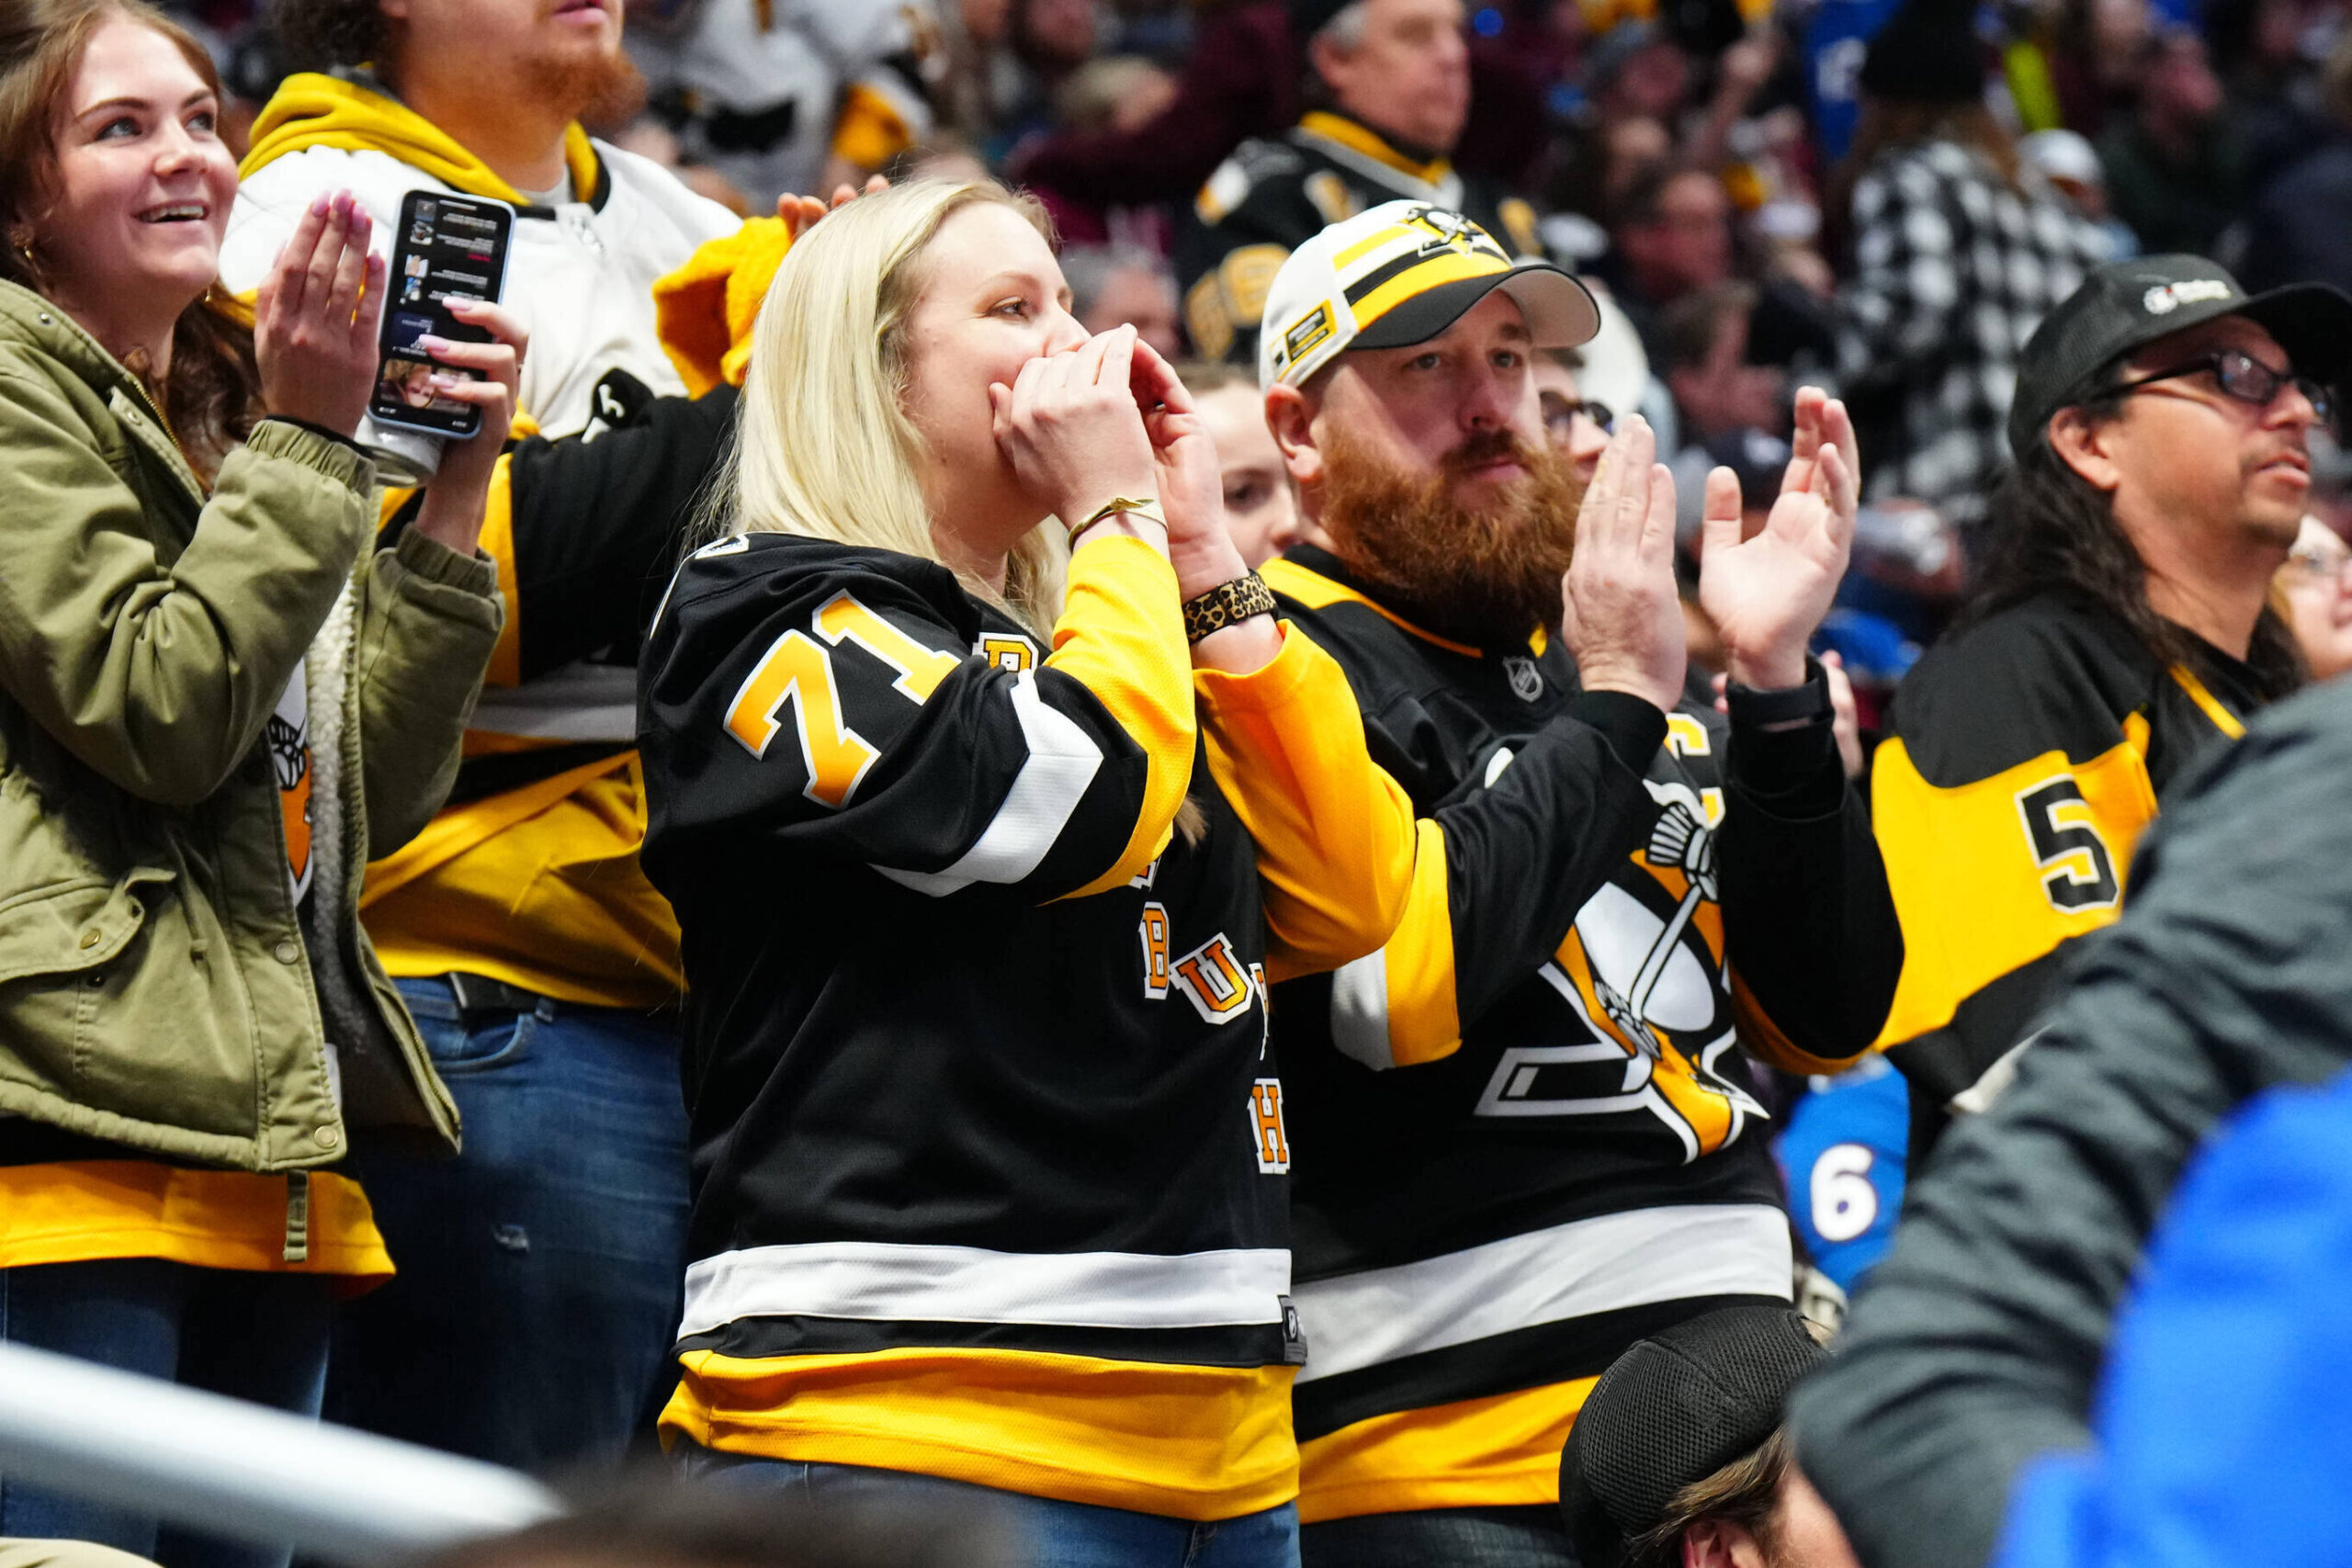 NHL: Pittsburgh Penguins at Colorado Avalanche